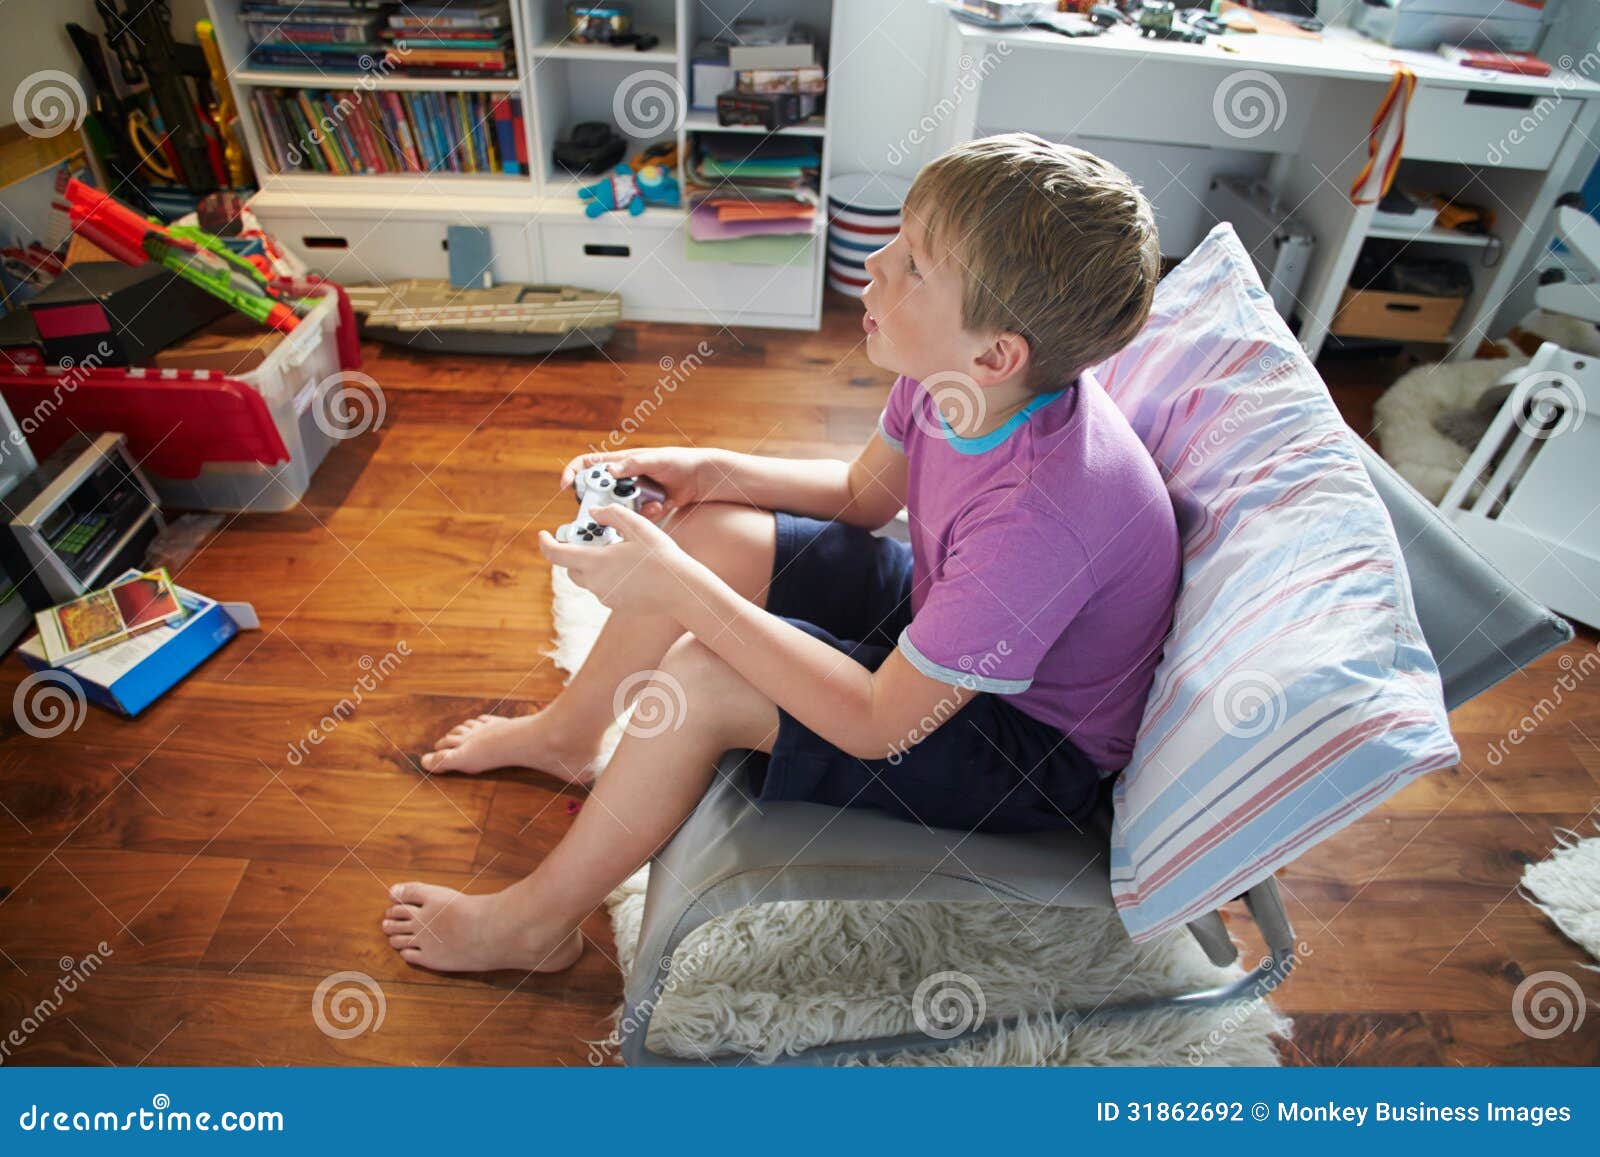 Young Boy Playing Video Game In Bedroom Stock Photo Image